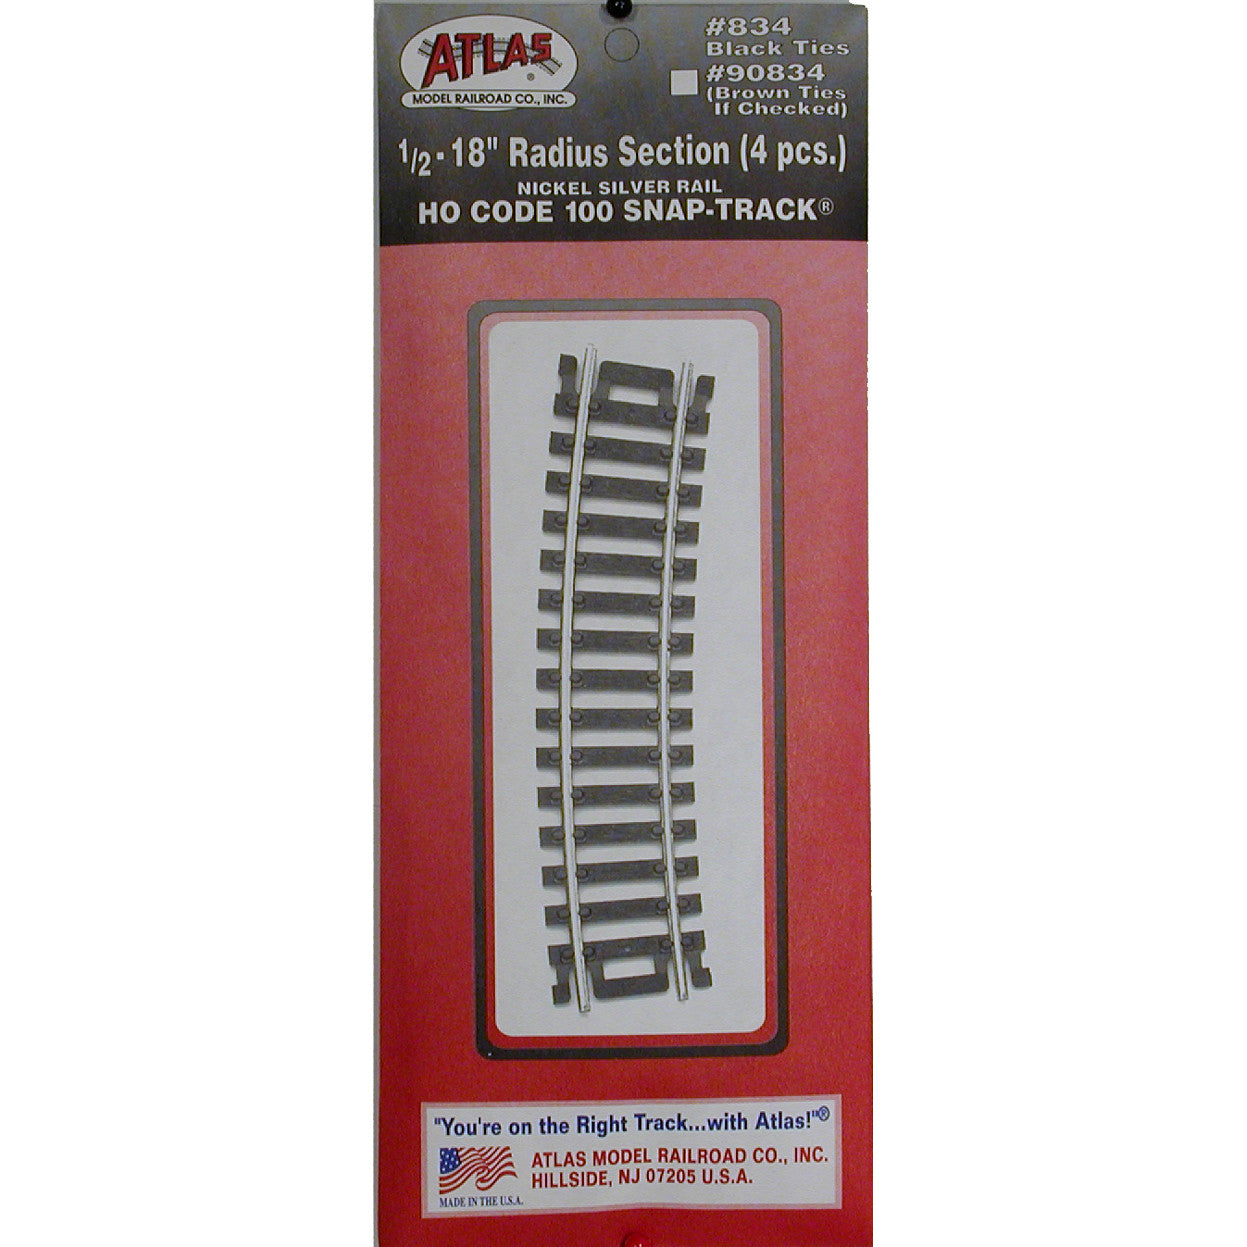 Atlas HO Code 100 Snap-Track 1/2 - 18" Radius Section #834 (4 pack)